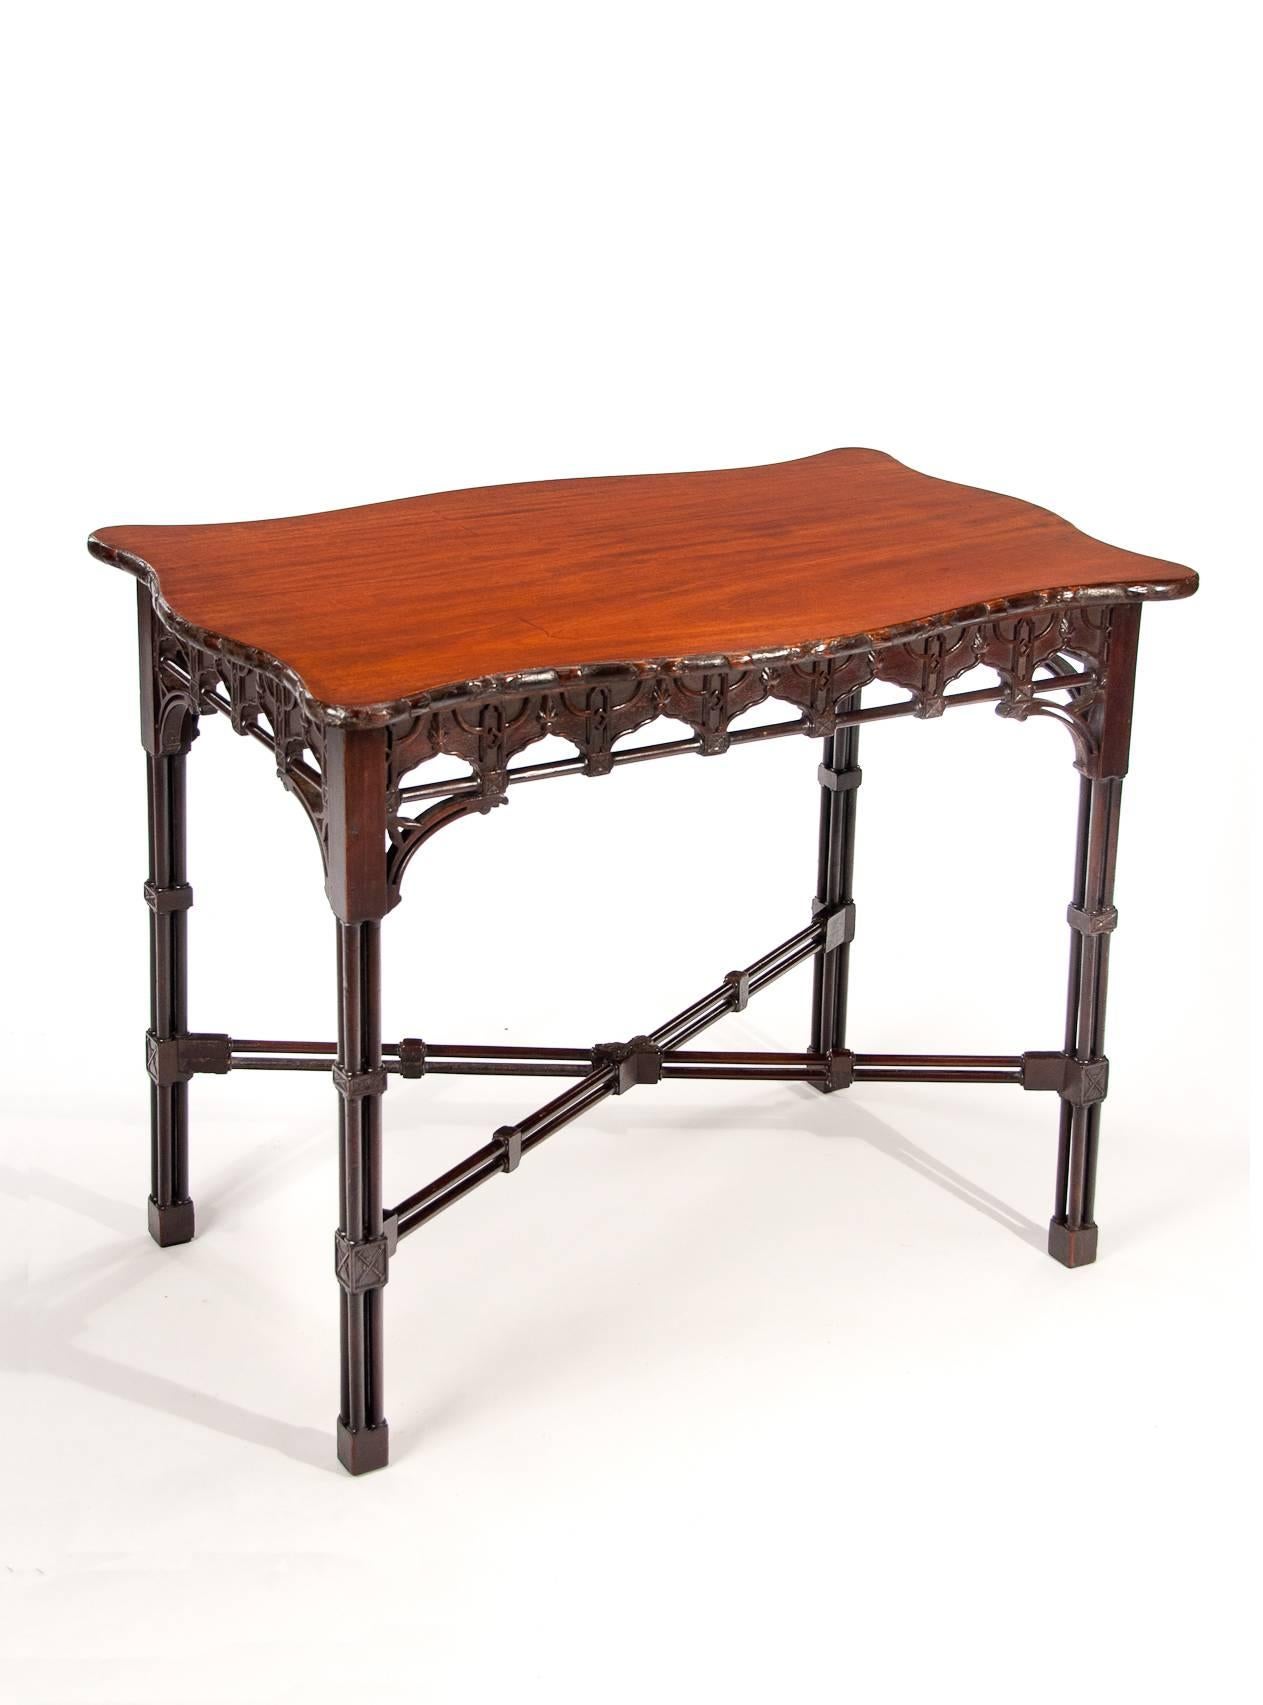 Good quality mahogany Chinese Chippendale style centre / silver table, circa 1900.
The shaped top having serpentine outlines with rosette and ribbon twist mouldings, above a blind fretwork frieze with arcading joined by turned rails having pierced